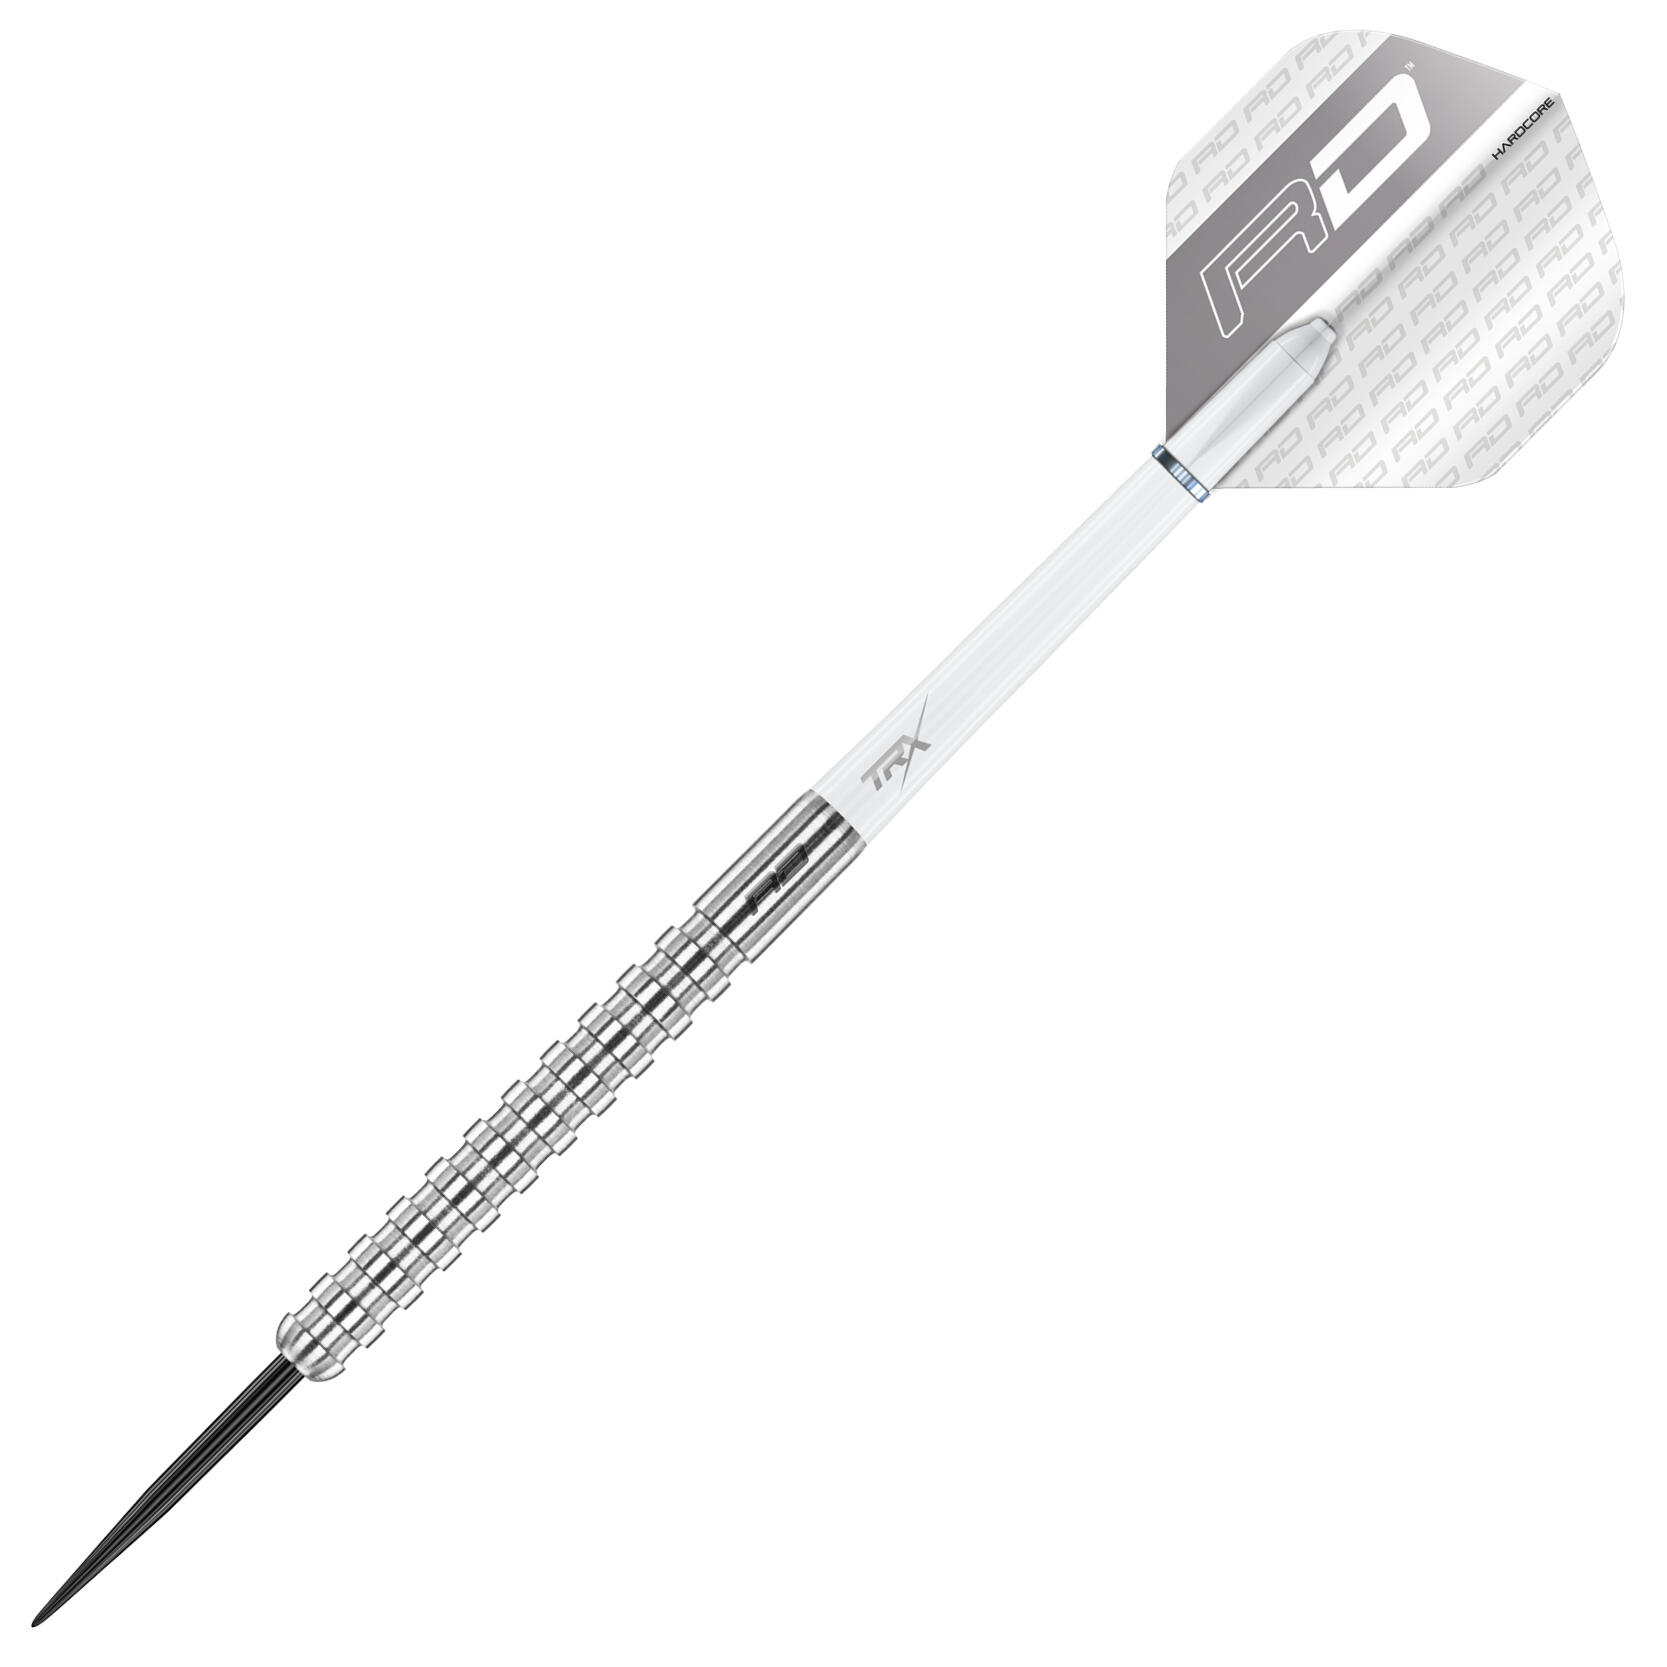 Javelin: 20g - Tungsten Darts Set with Flights and Stems 2/5